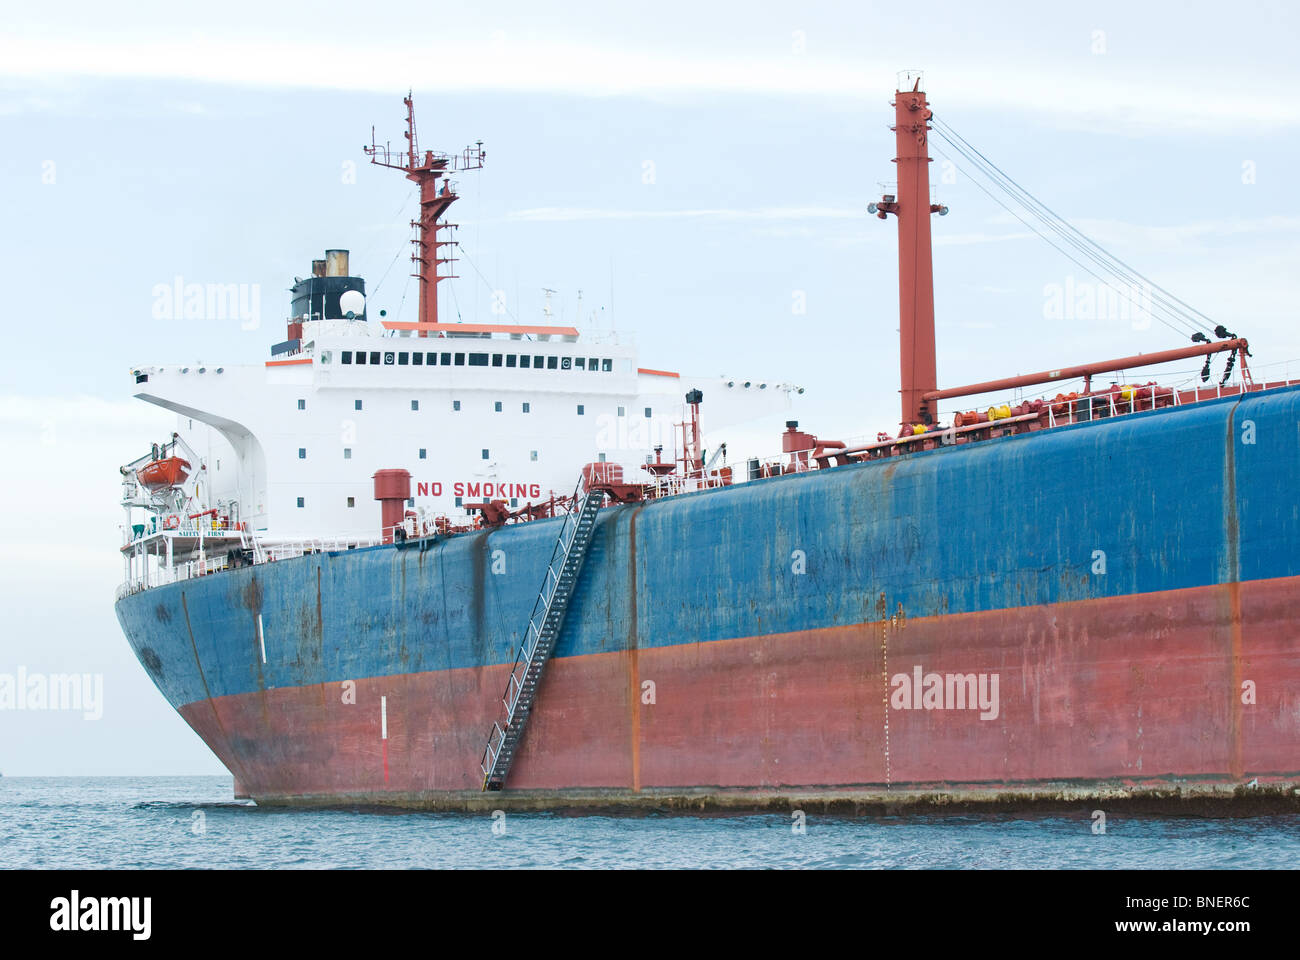 Rusty, old oil tanker moored in calm waters Stock Photo